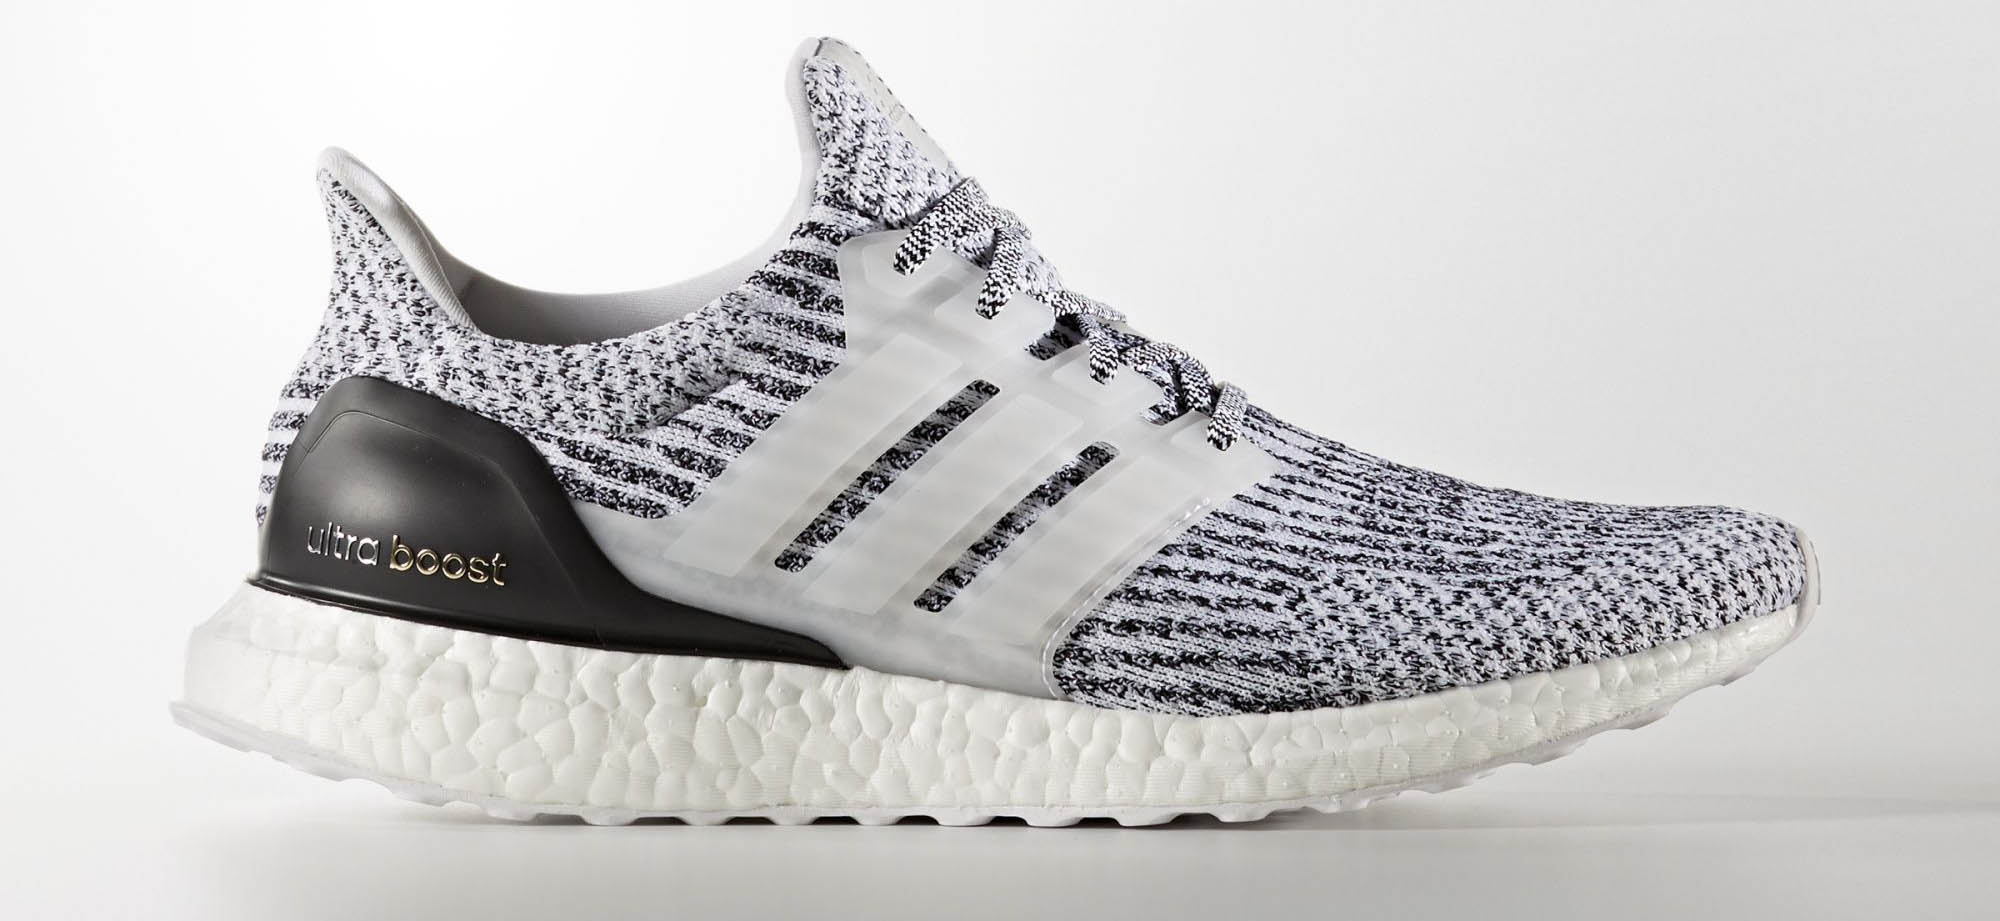 The adidas Ultra Boost 3.0 'Oreo' is 